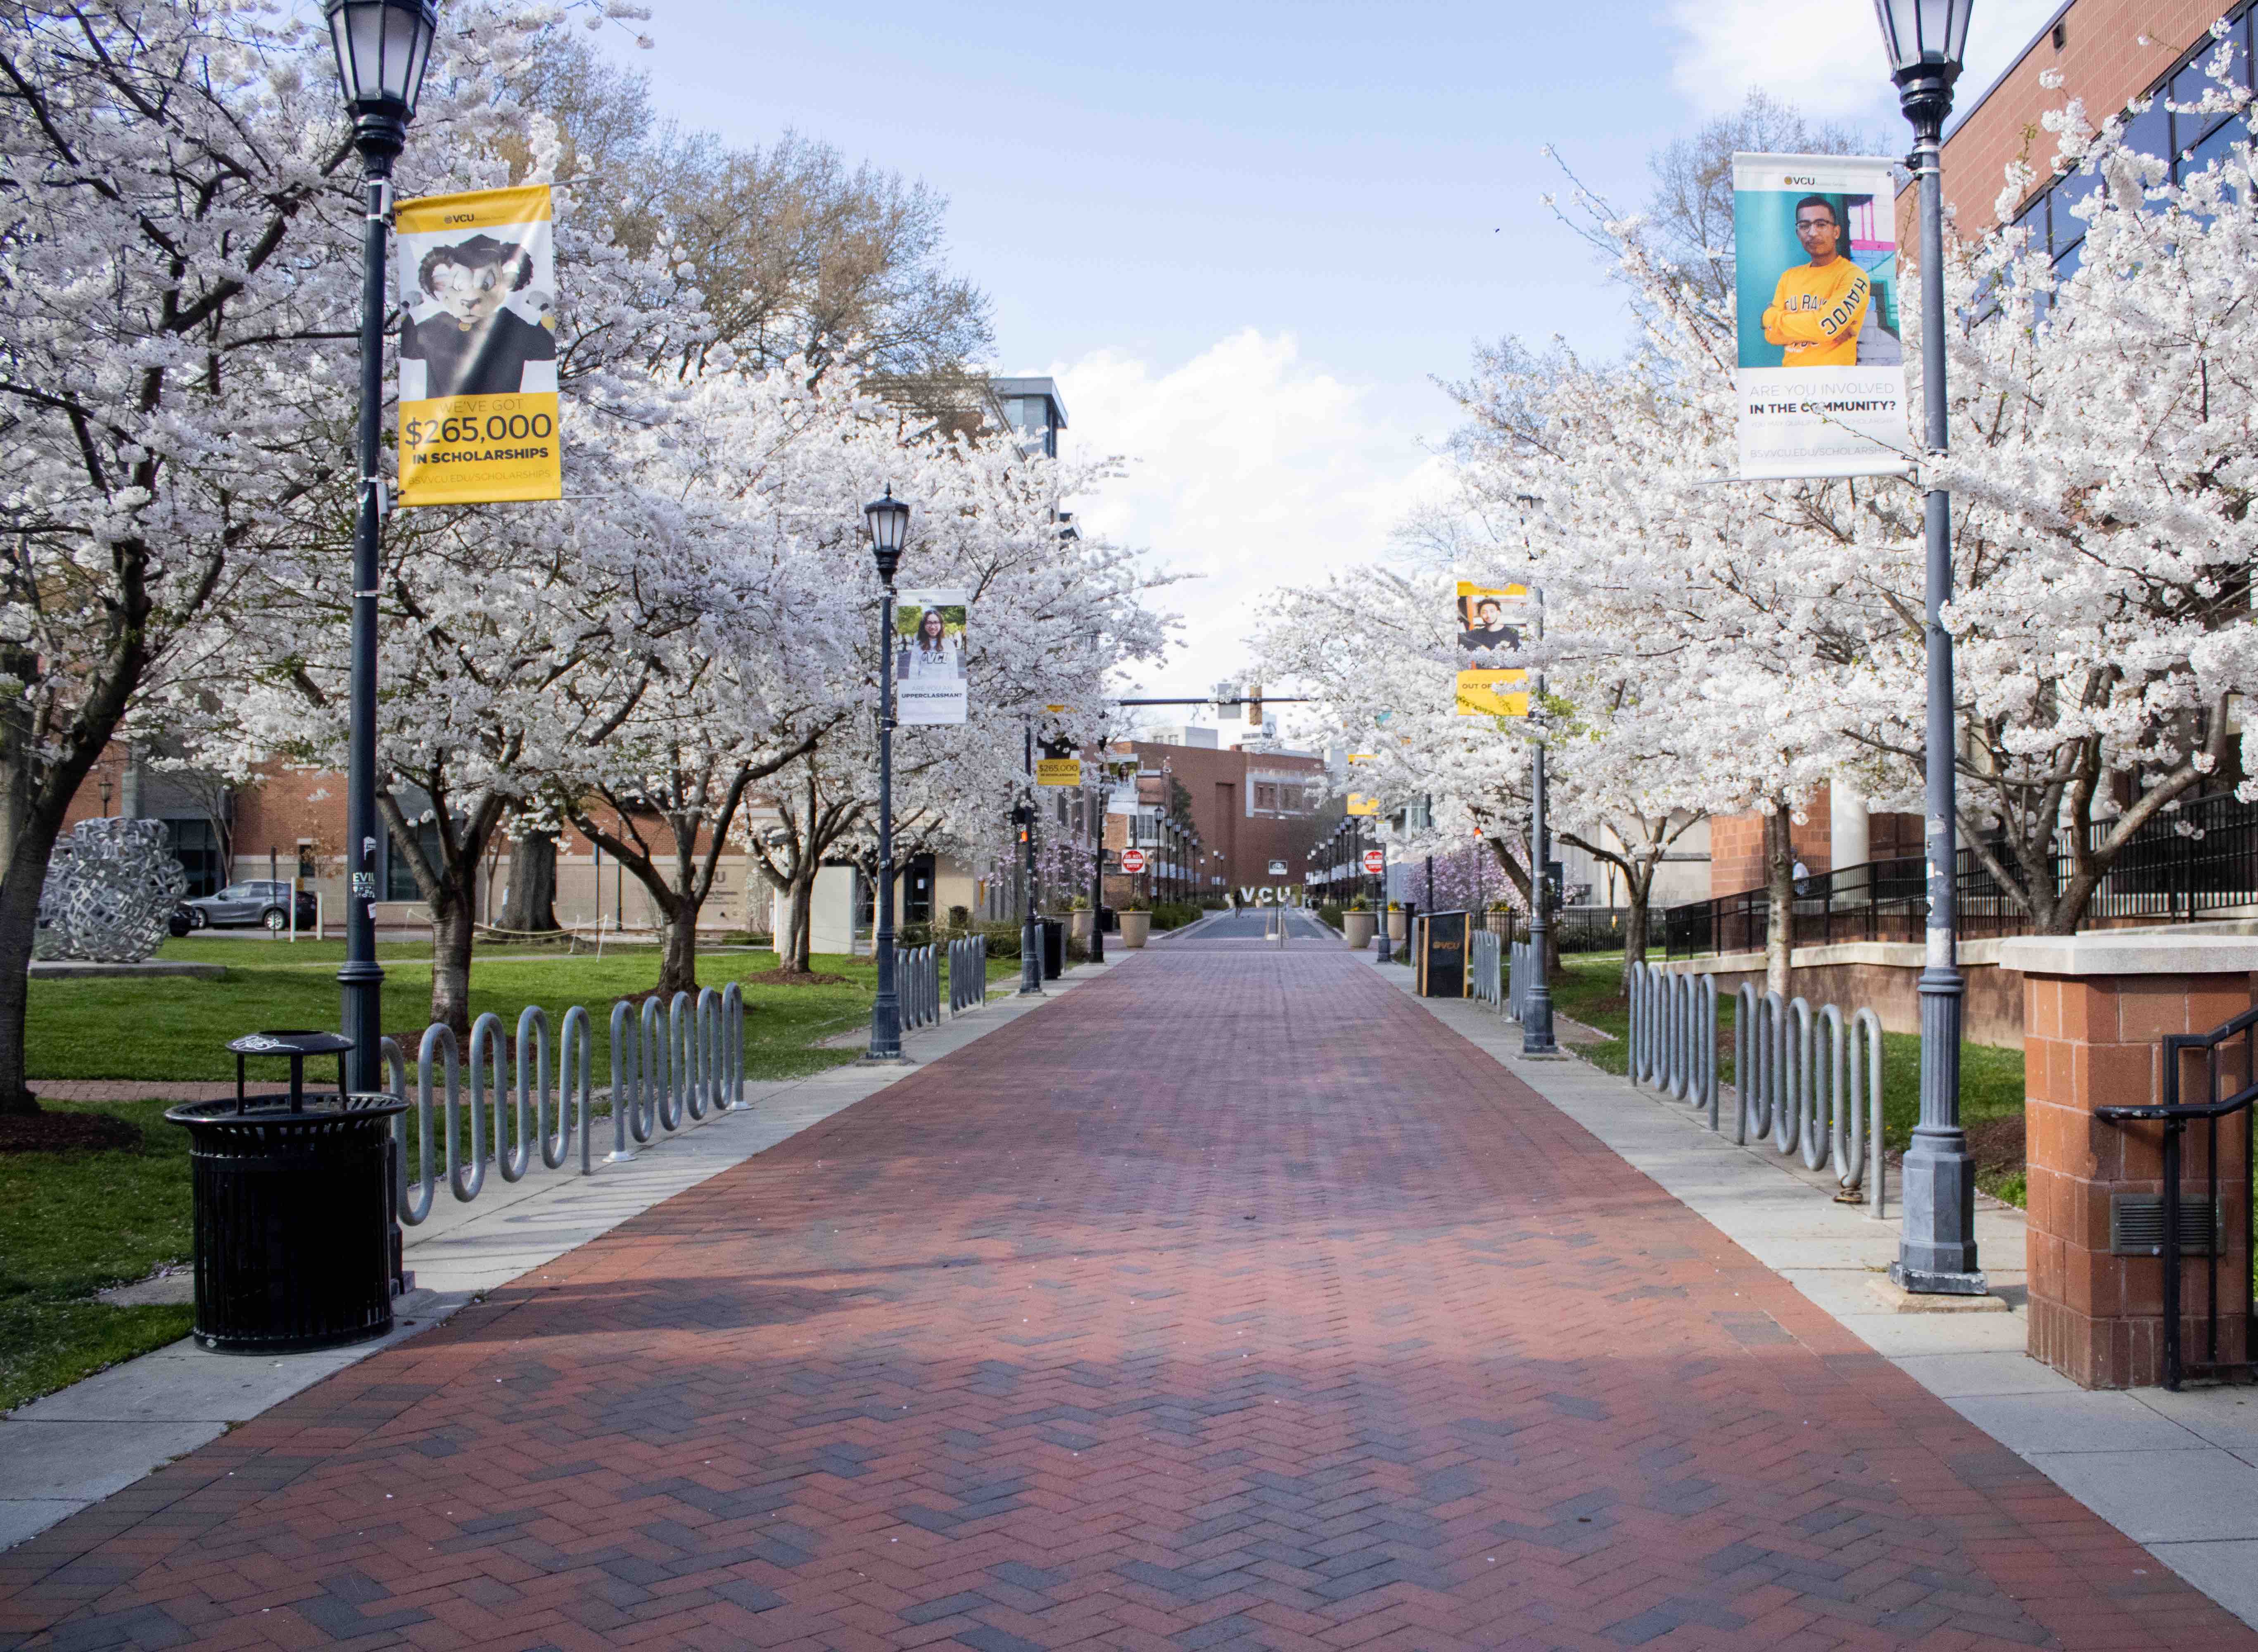 VCU opts for online summer classes, offers discounted fees